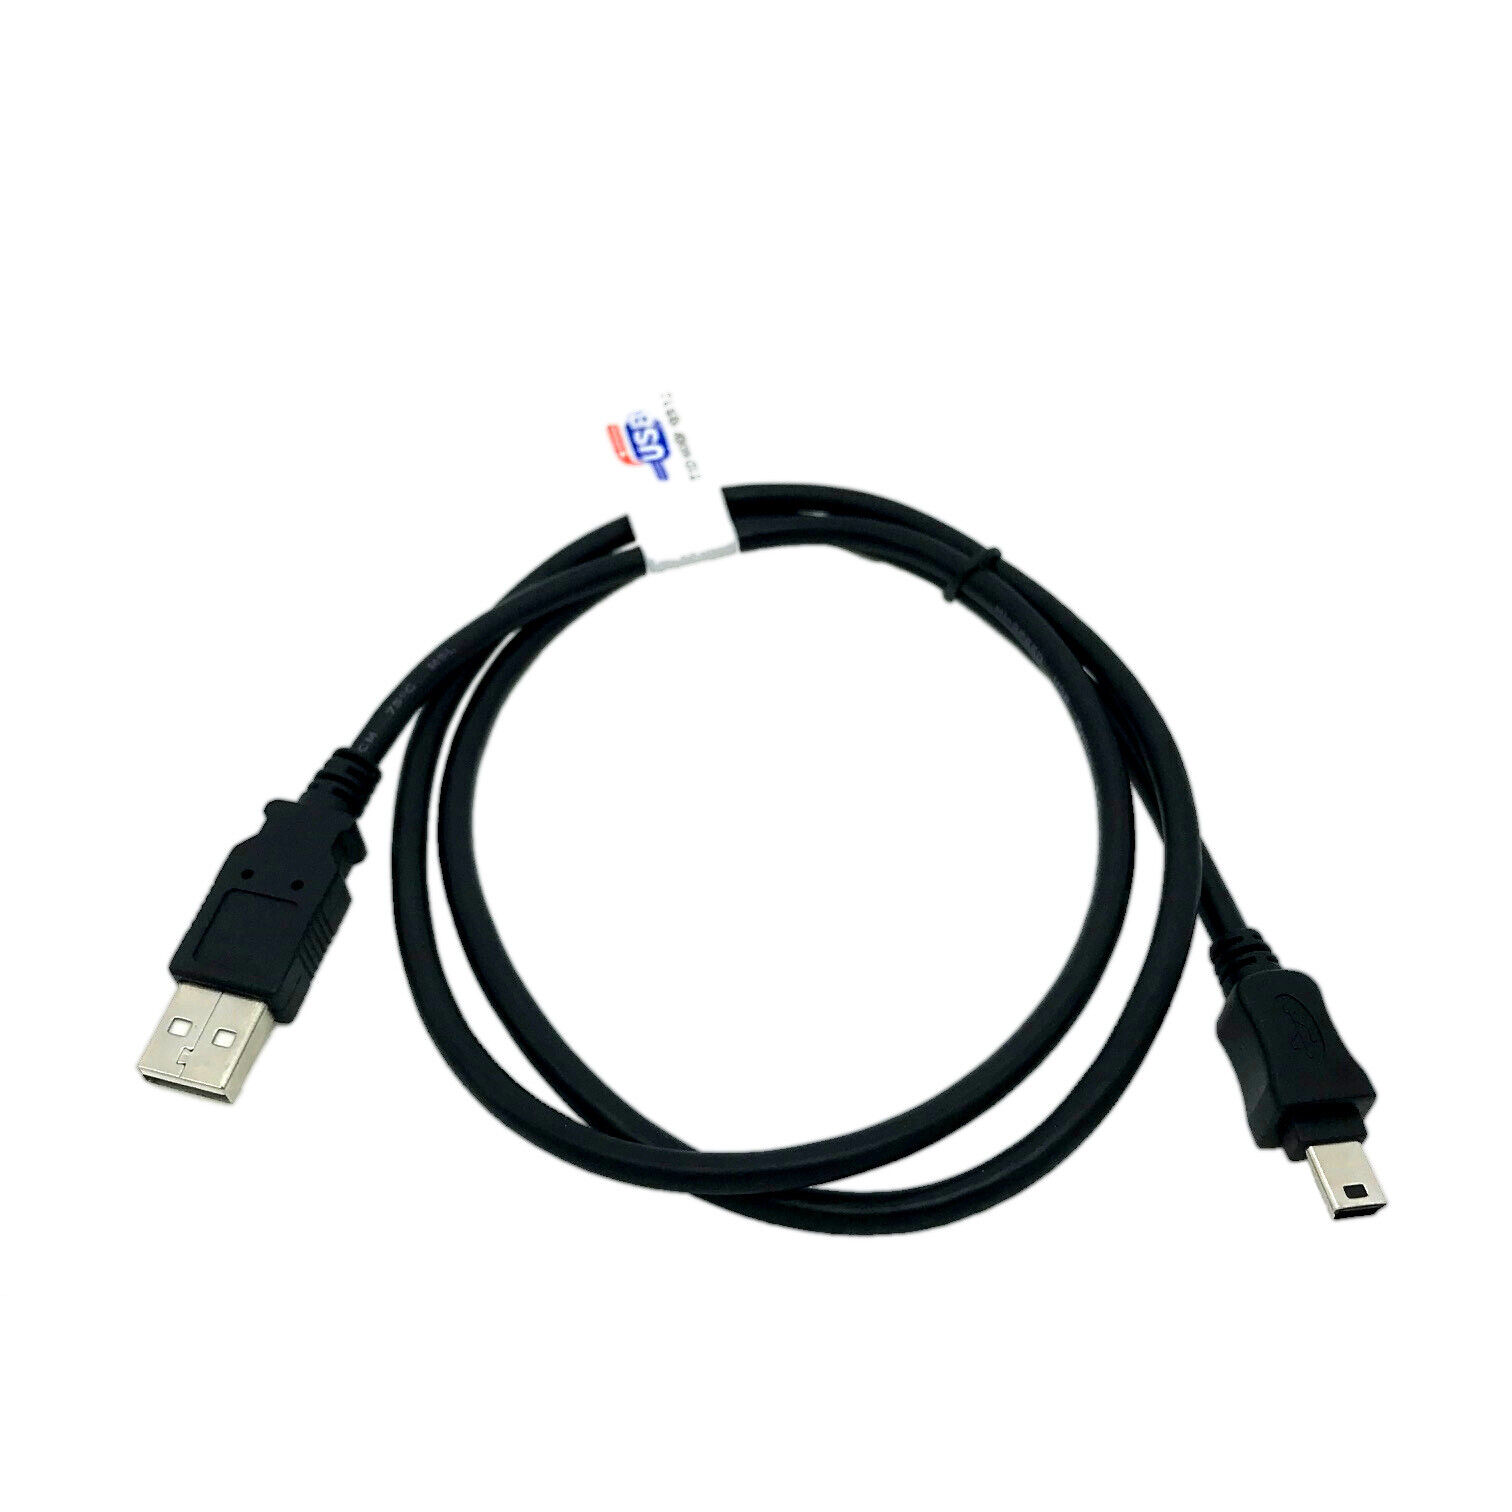 USB Cord Cable for GARMIN DRIVE SMART 51 LM 61 LM 51 LMT HD 61 LMT-S GPS 3\'